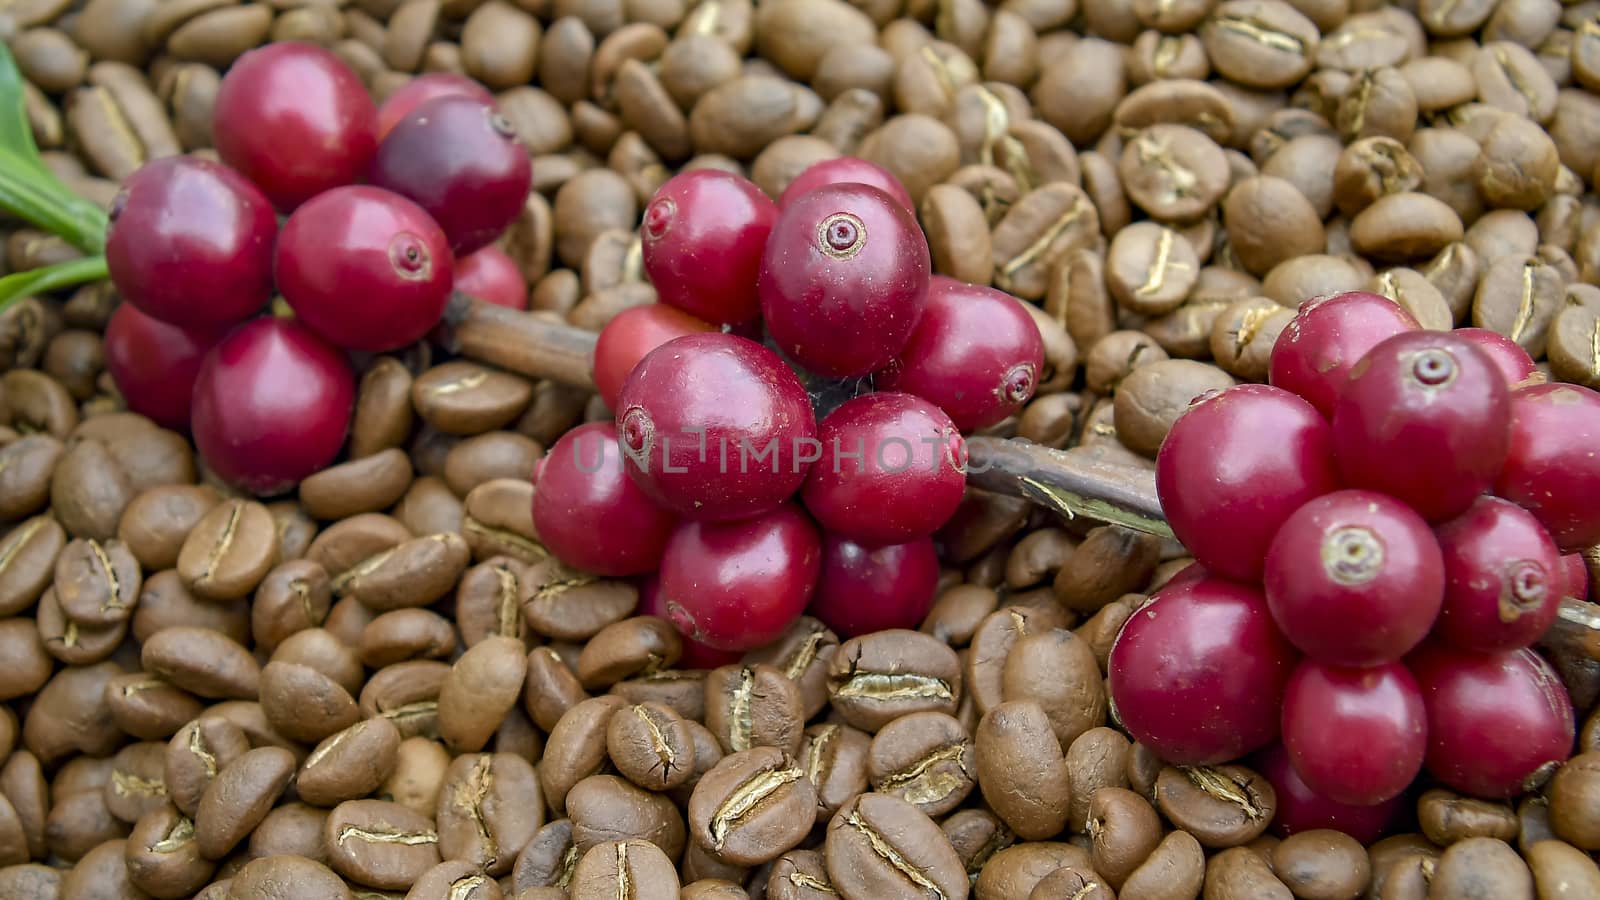 Fresh coffee cherry, red coffee beans on roasted coffee bean tex by Aedka_Stodio